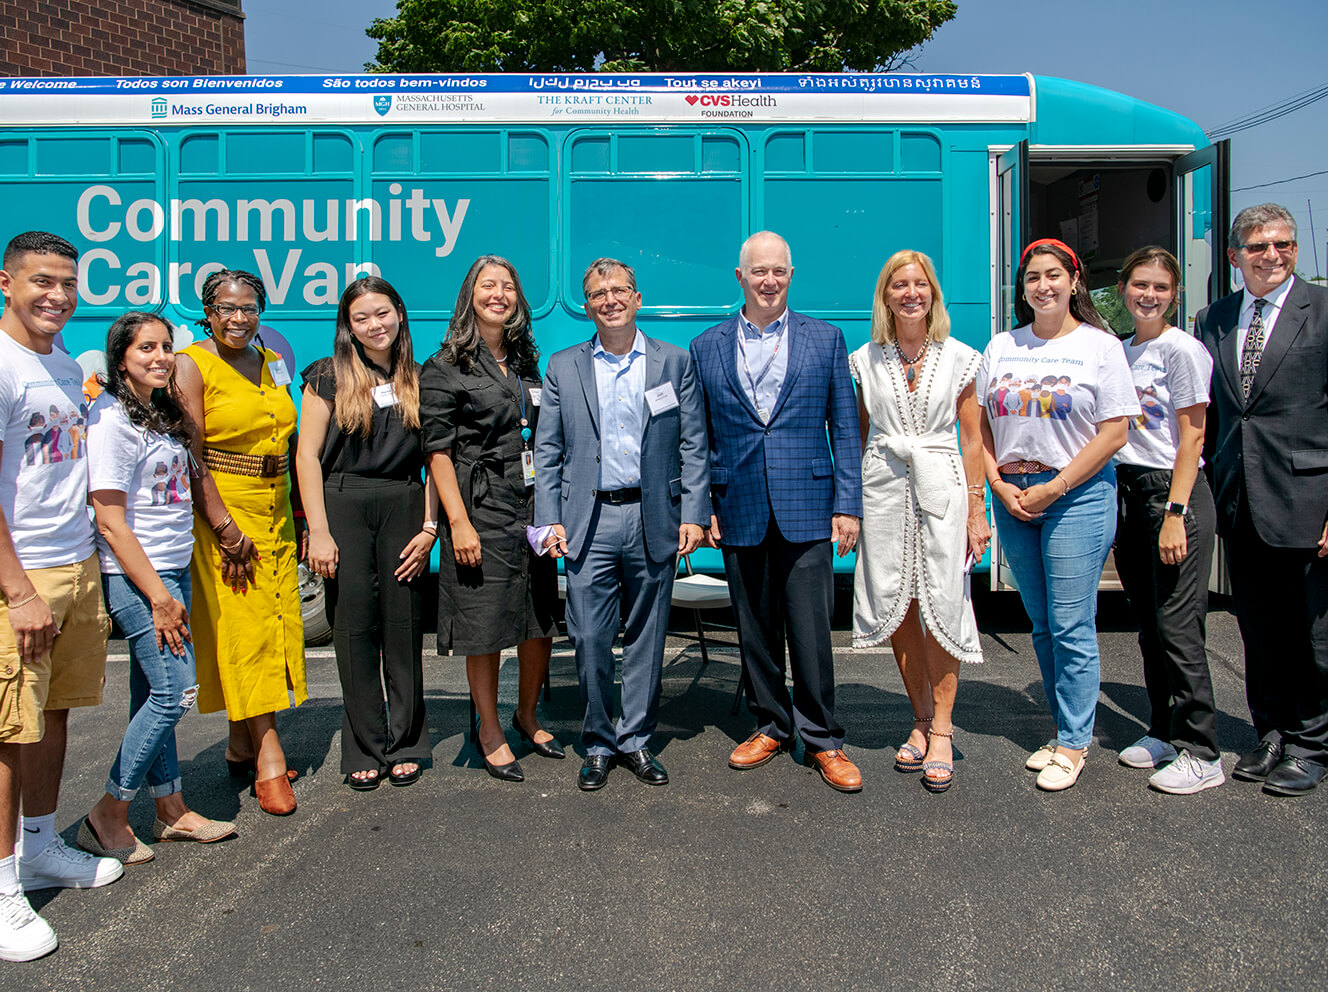 Celebrating Success: Mobile Vaccination Van Delivers Thousands of Vaccines in Vulnerable Cities